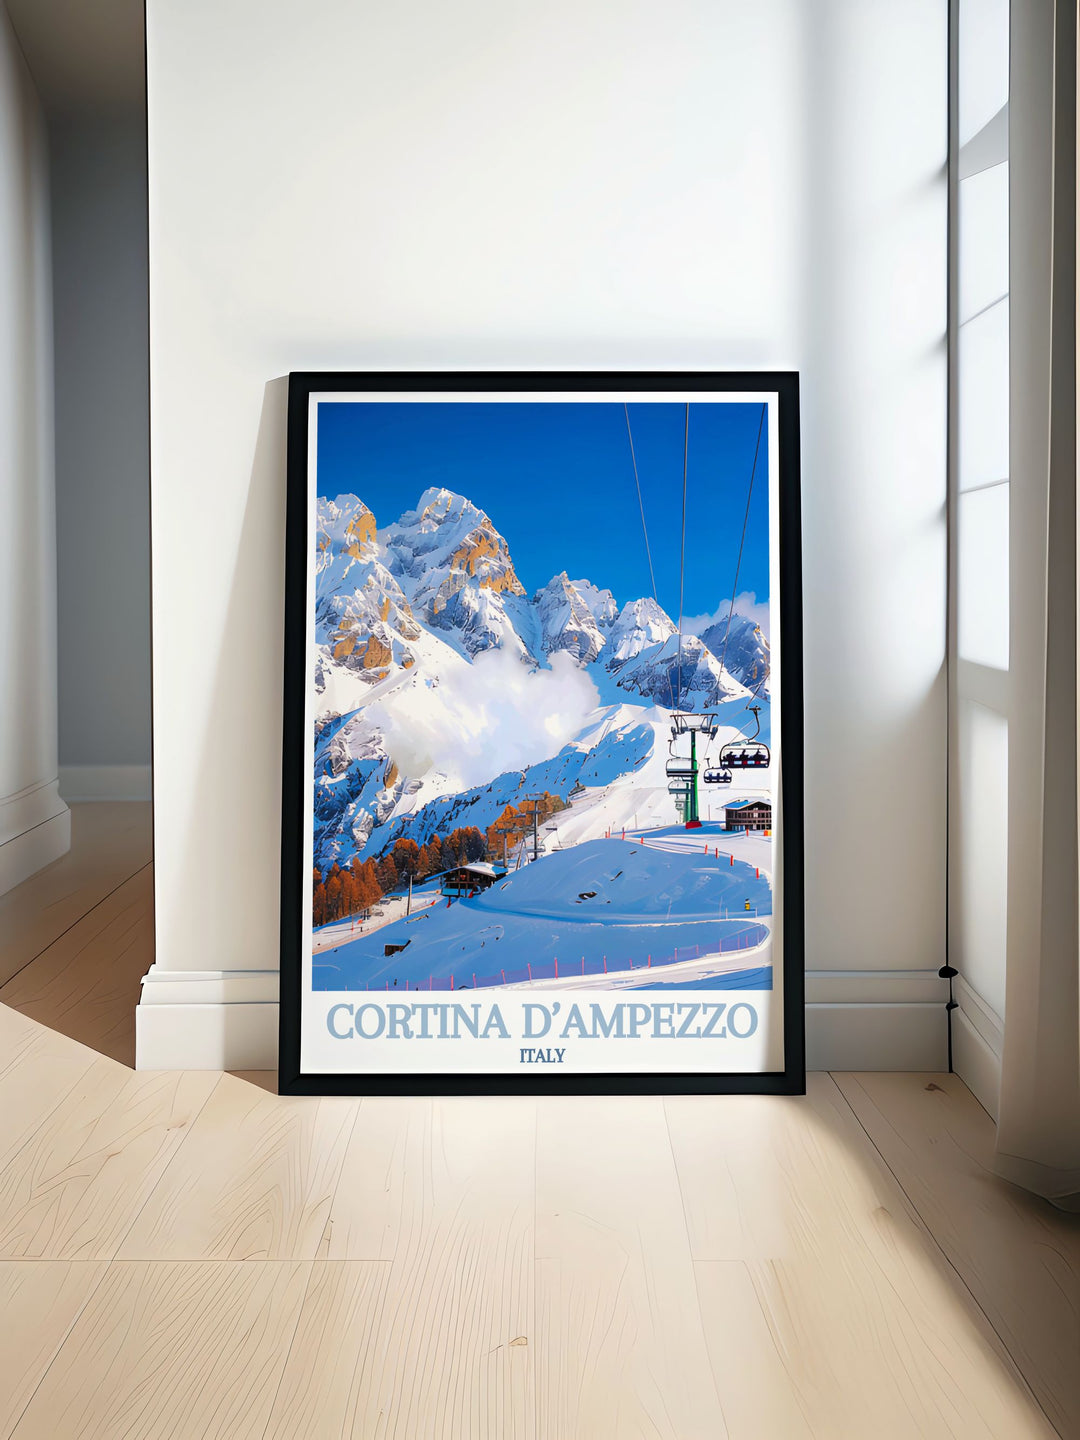 Capture the historical significance and natural beauty of Cortina dAmpezzo with our unique art prints. Perfect for history buffs and nature lovers alike, these artworks showcase the timeless allure and cultural richness of one of Italys most famous regions.